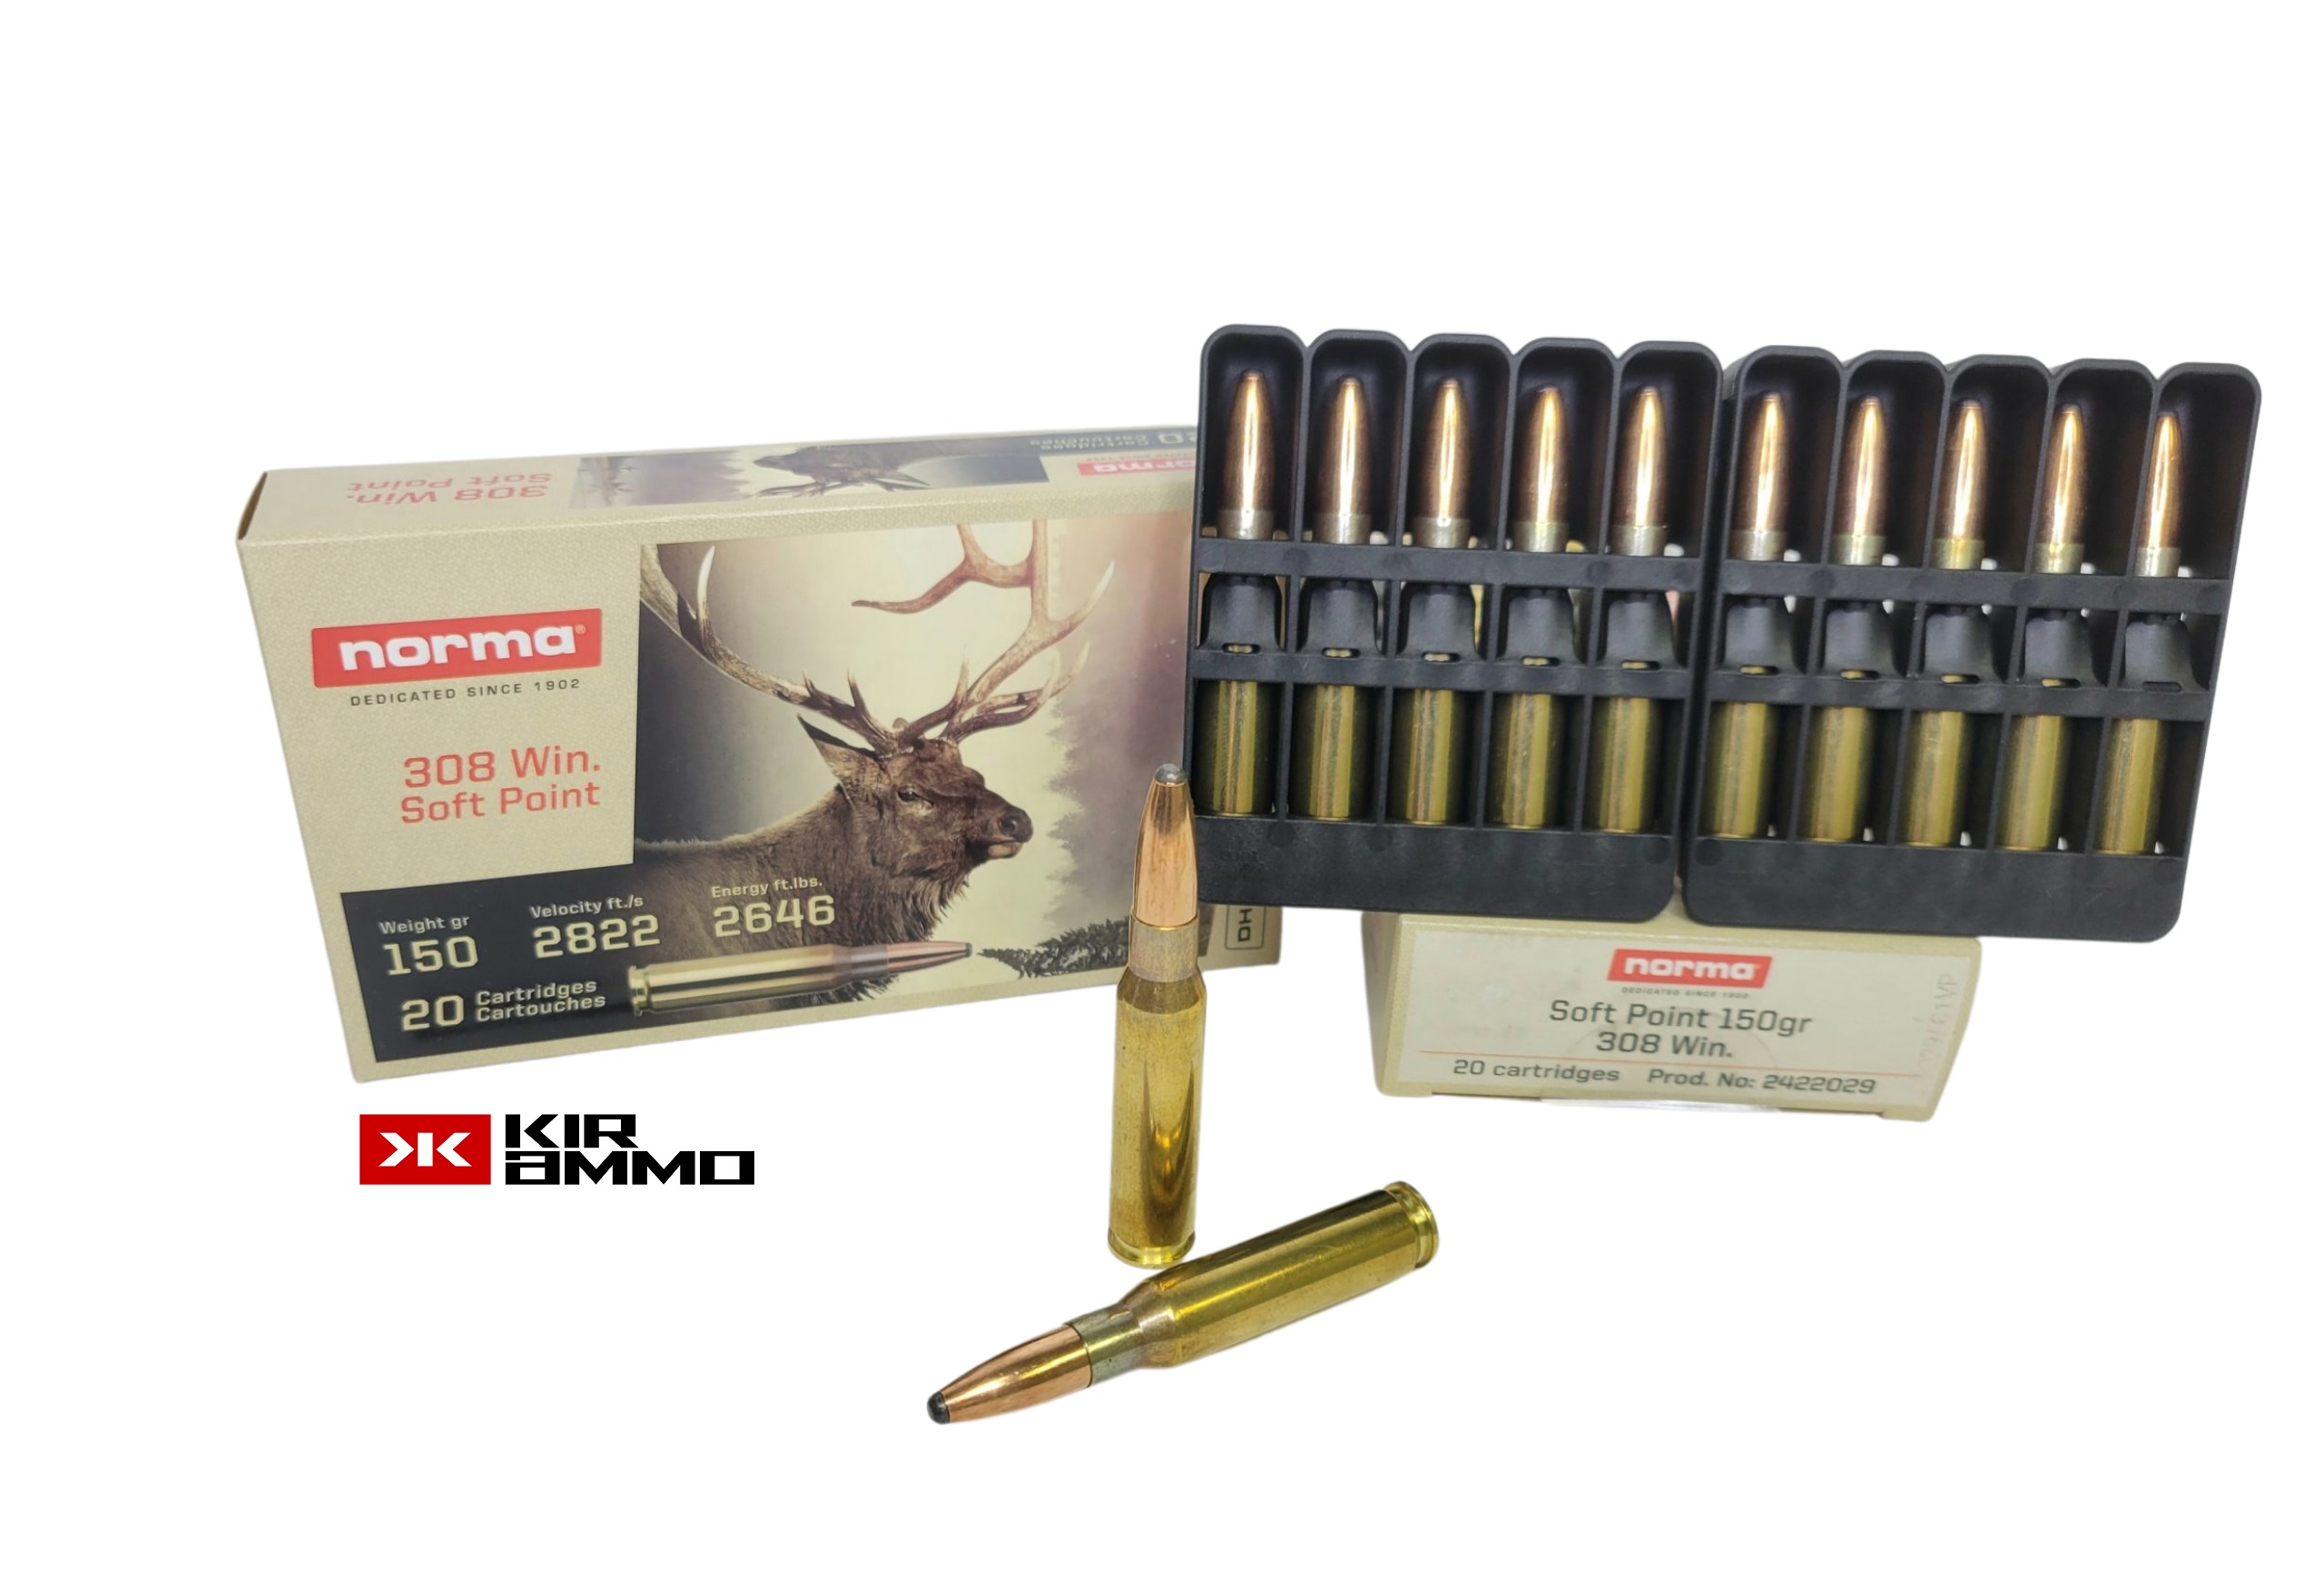 PPU 7.5×55 Swiss SAME DAY SHIPPING PP7SF 174 Grain FMJ – 20 Rounds (Box) [NO TAX outside Texas] Product Image